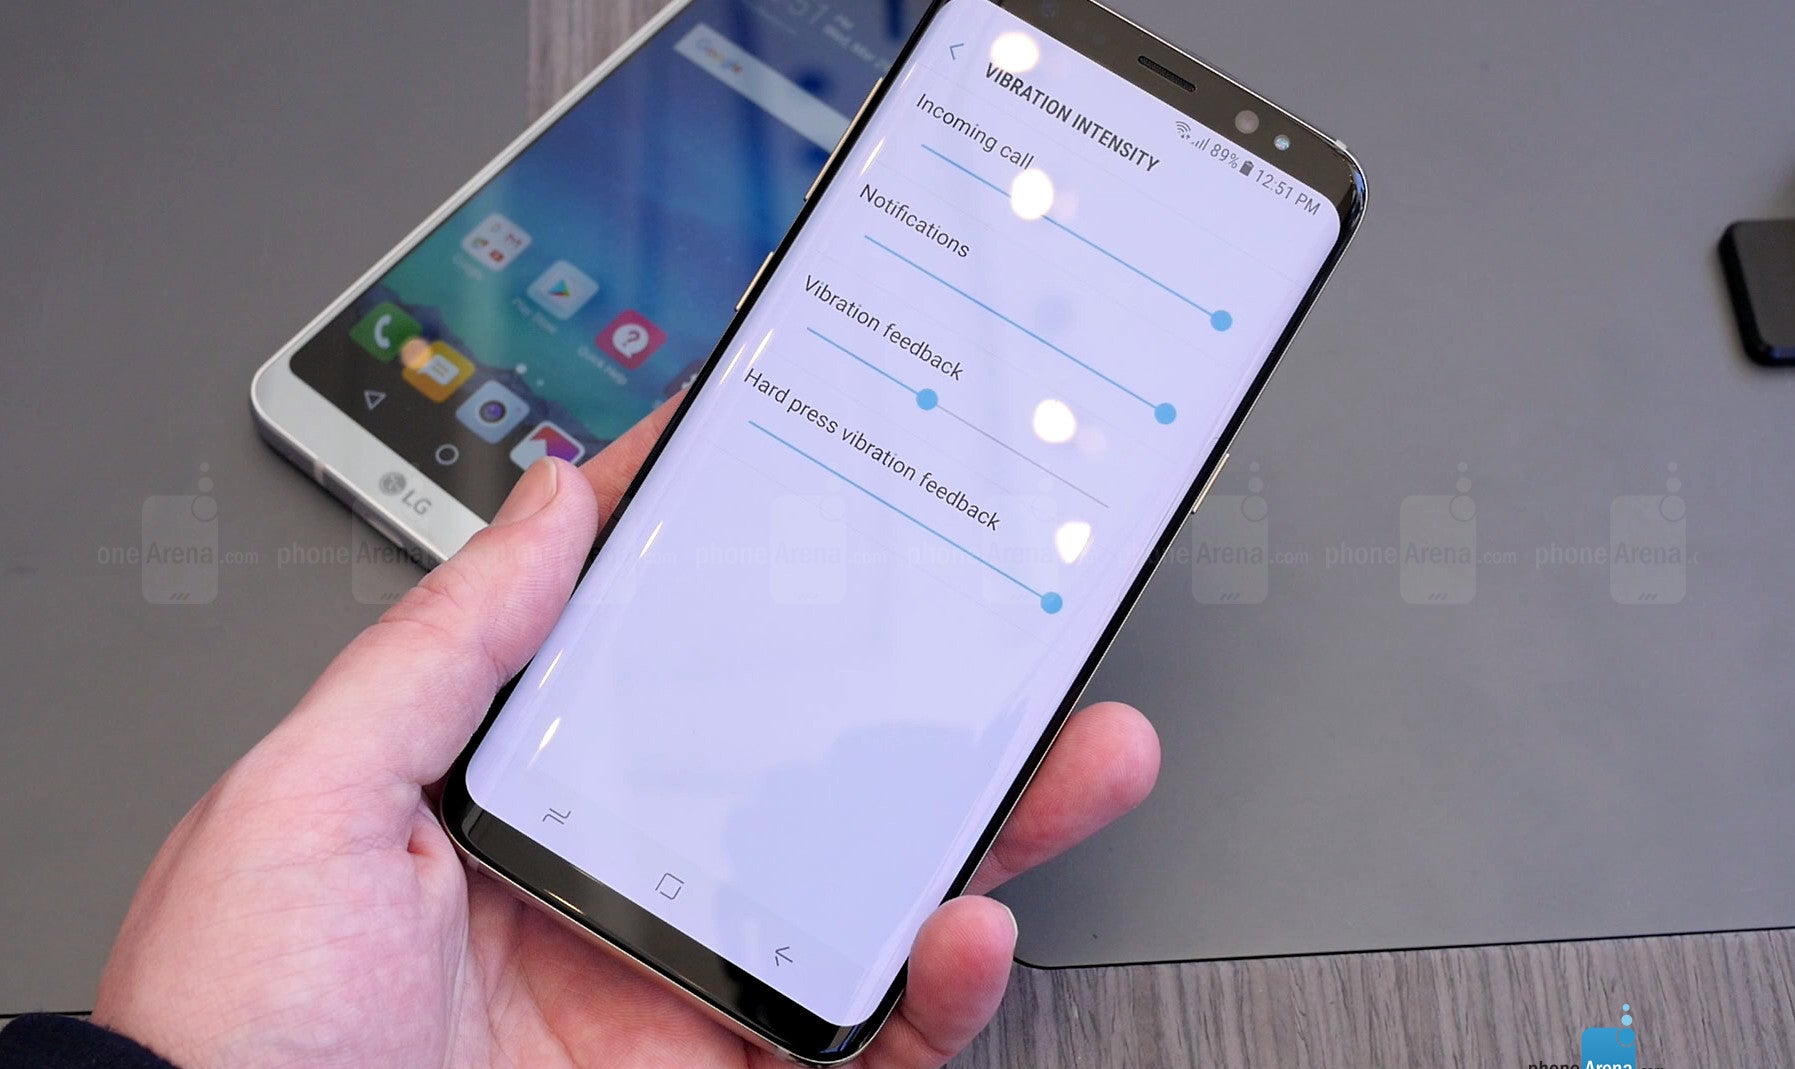 That haptic engine beneath the S8 home key has some adjustable power - Whew! Galaxy S8 lets you move the back key and adjust the home button feedback